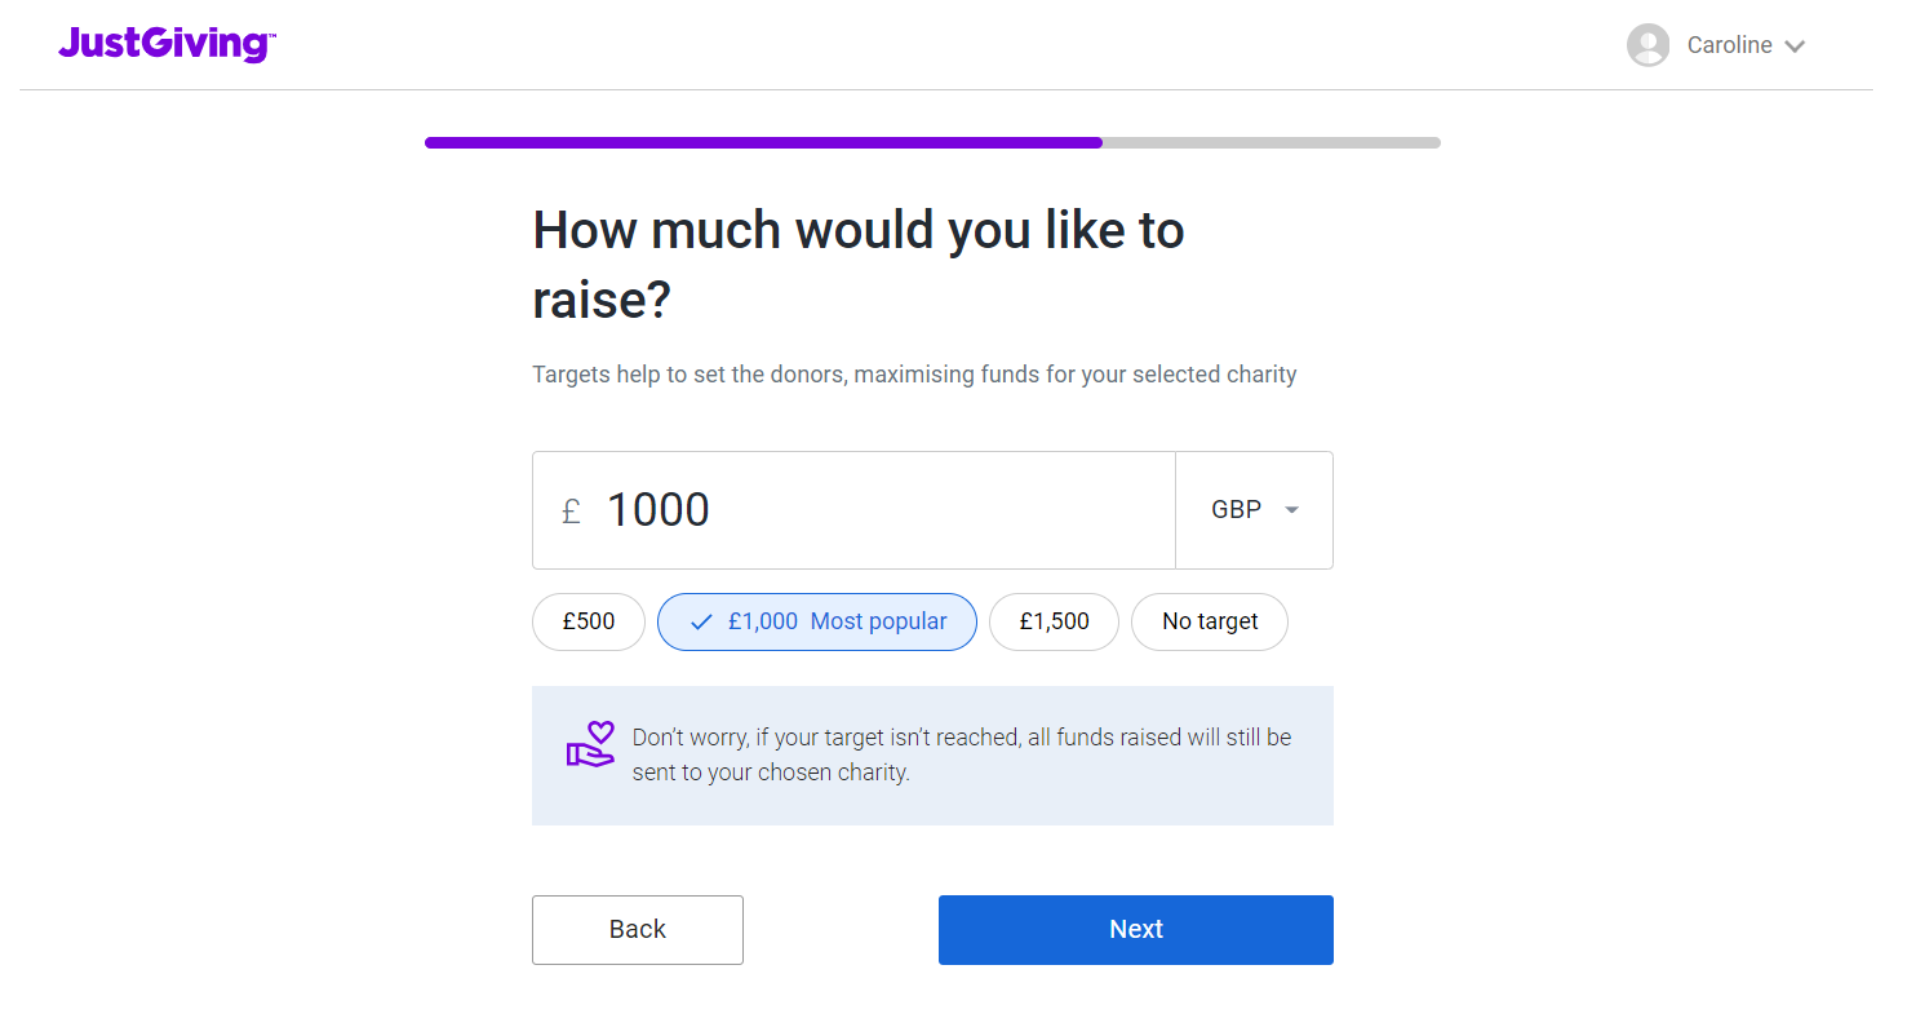 JustGiving guide - how much would you like to raise?